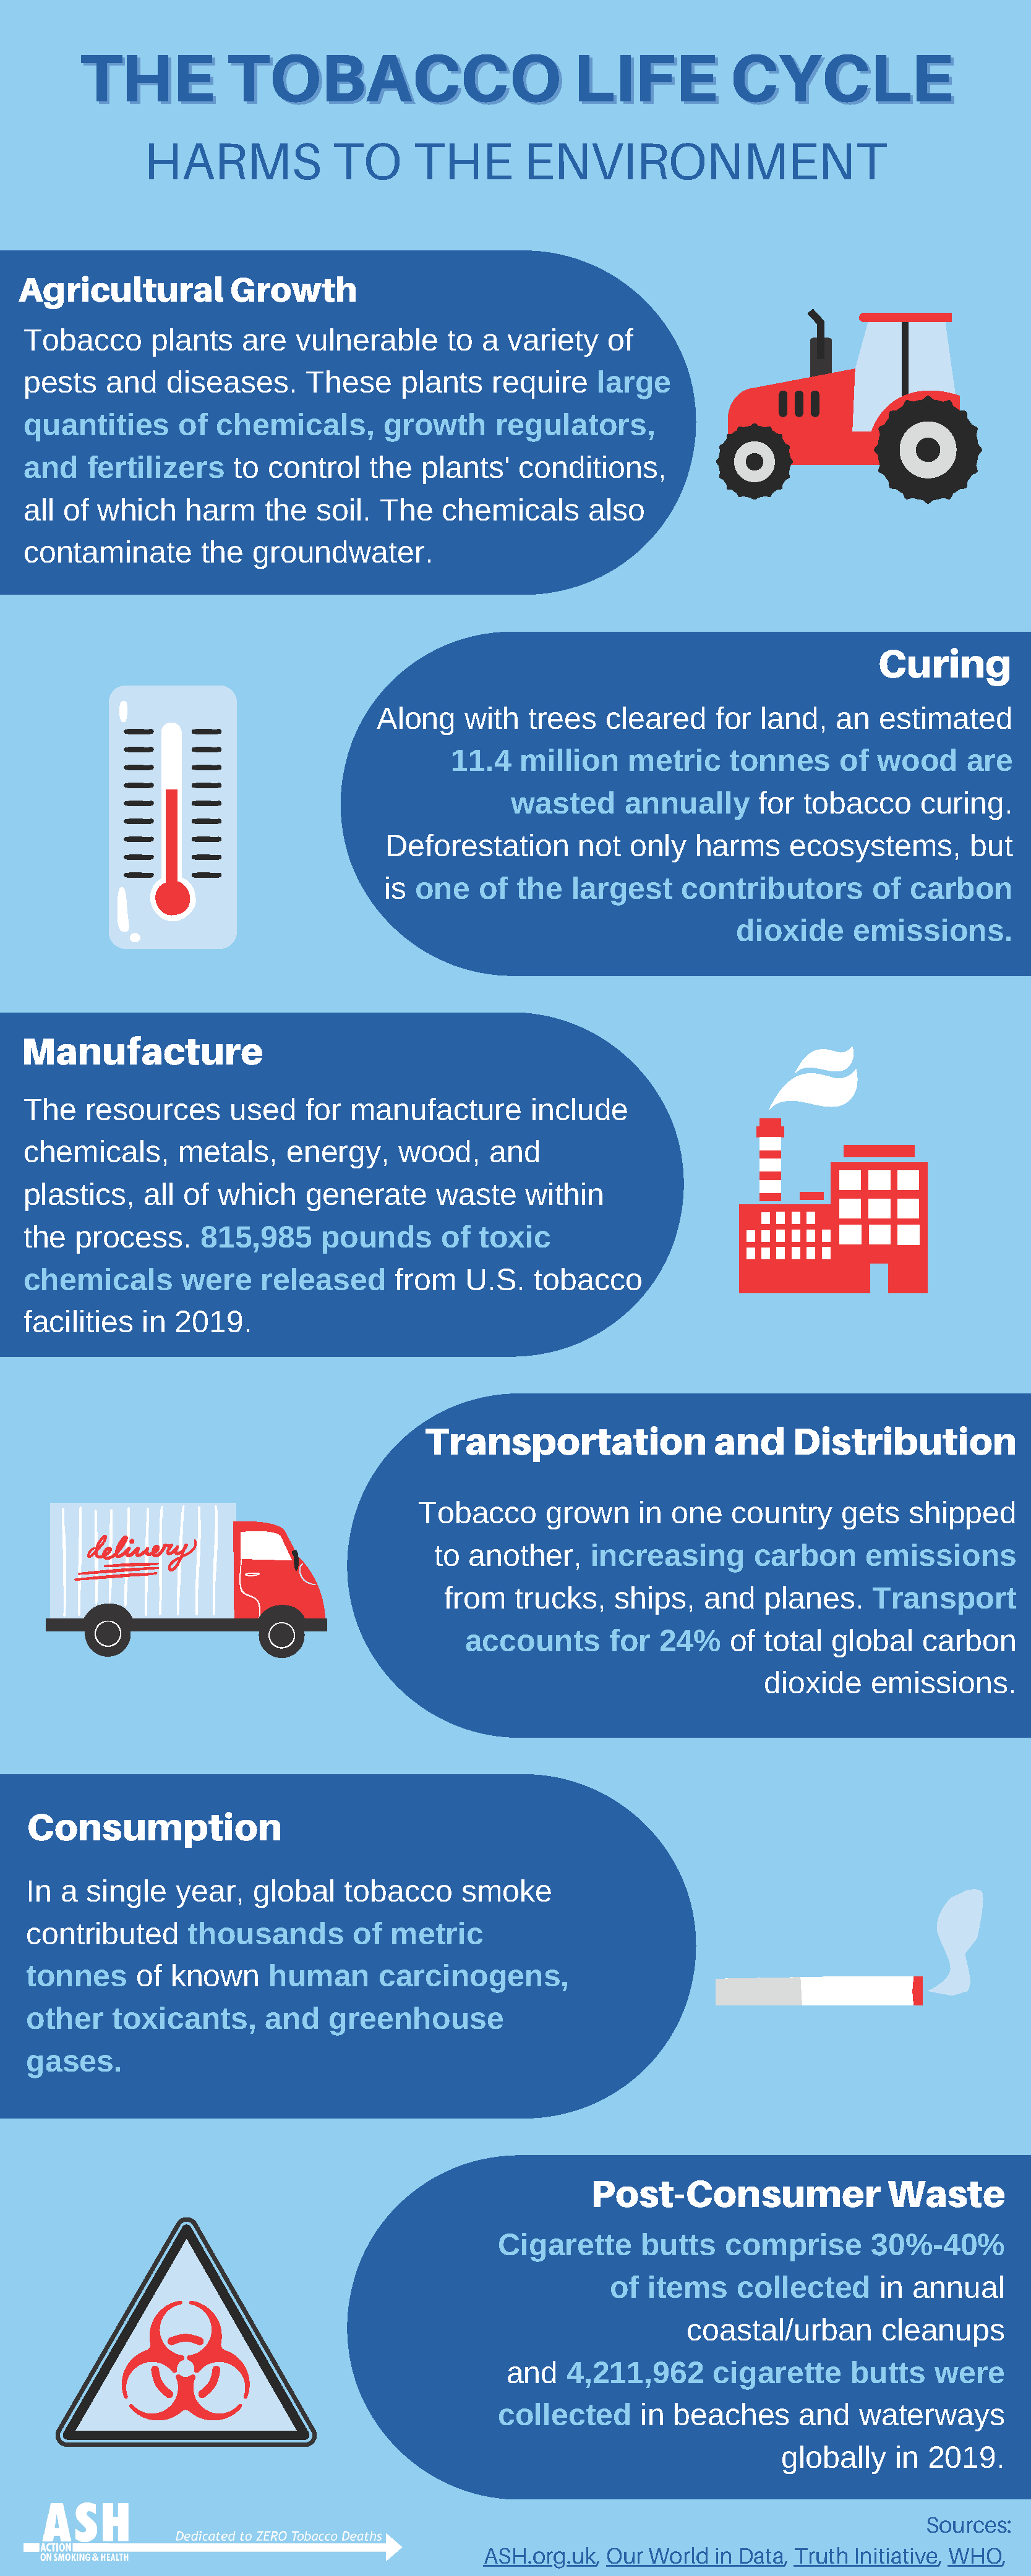 Tobacco harms the environment - infographic